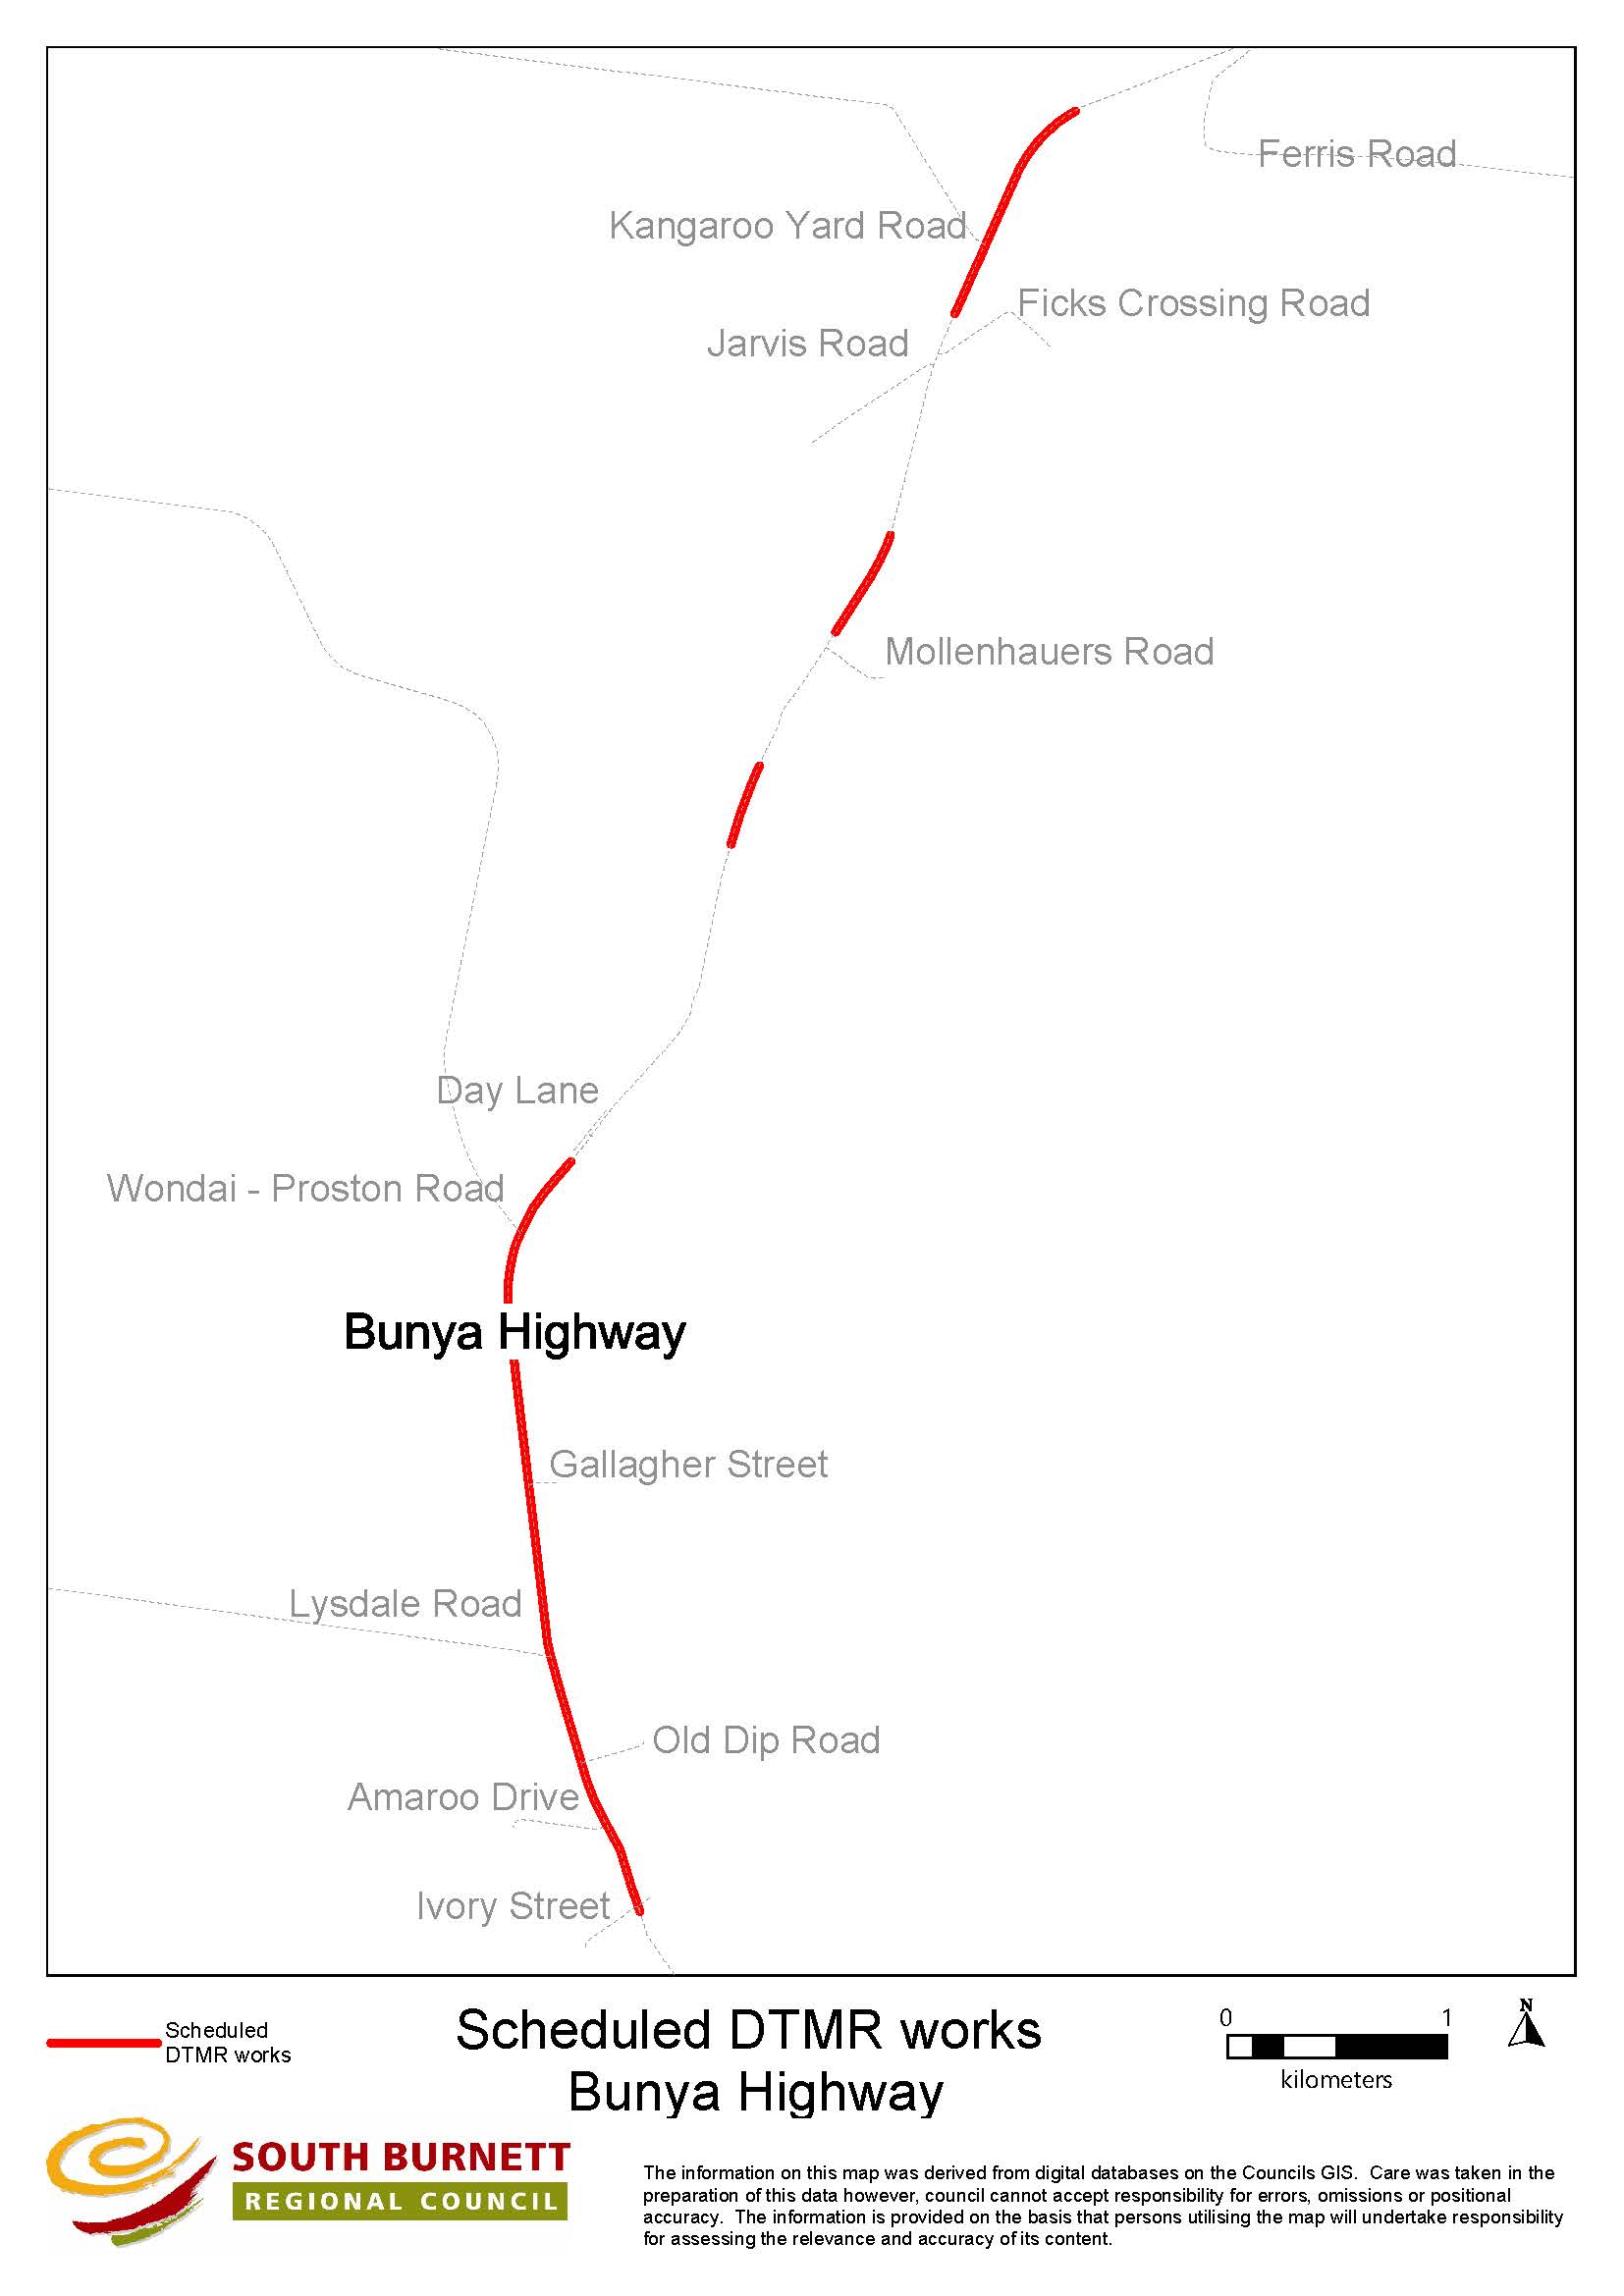 Image: Department of Transport and Main Roads scheduled works on the Bunya Highway